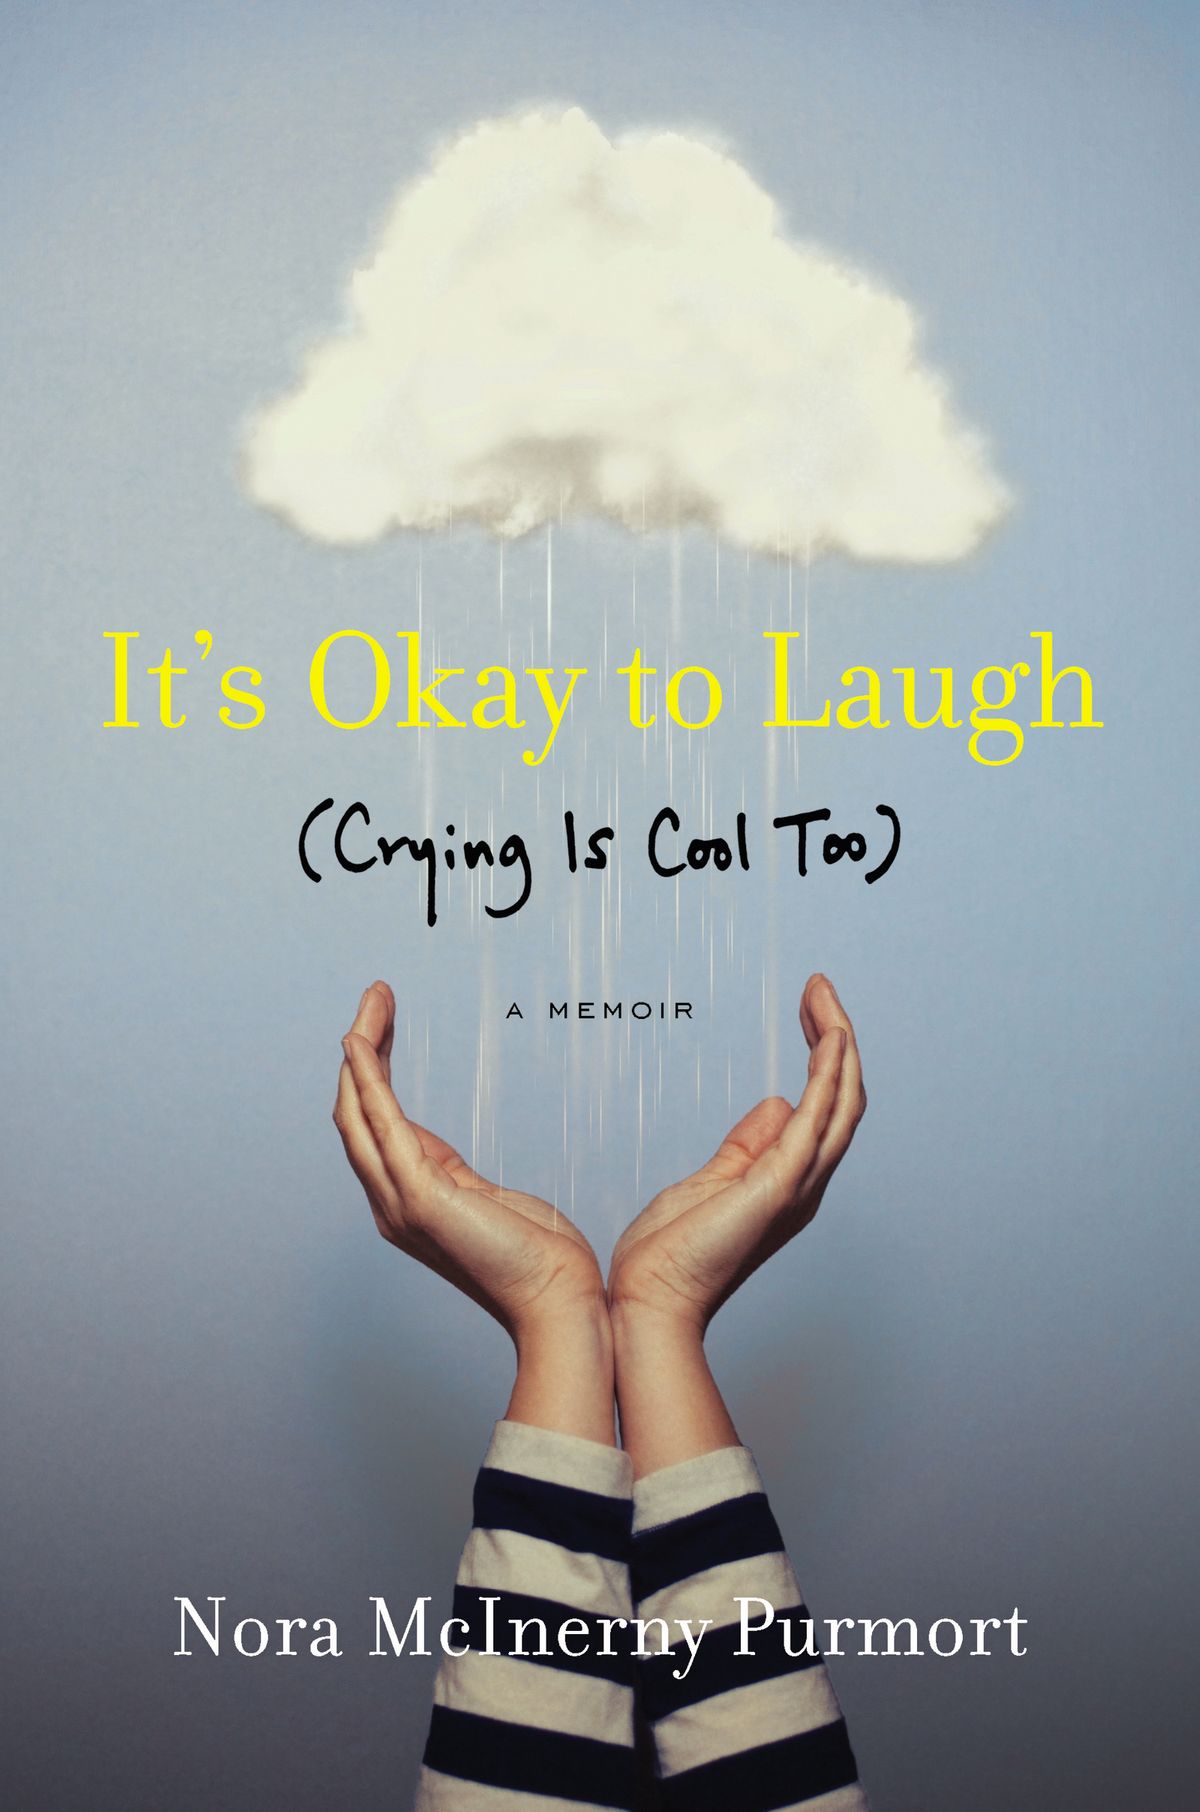 It's Okay to Laugh by Nora McInerny